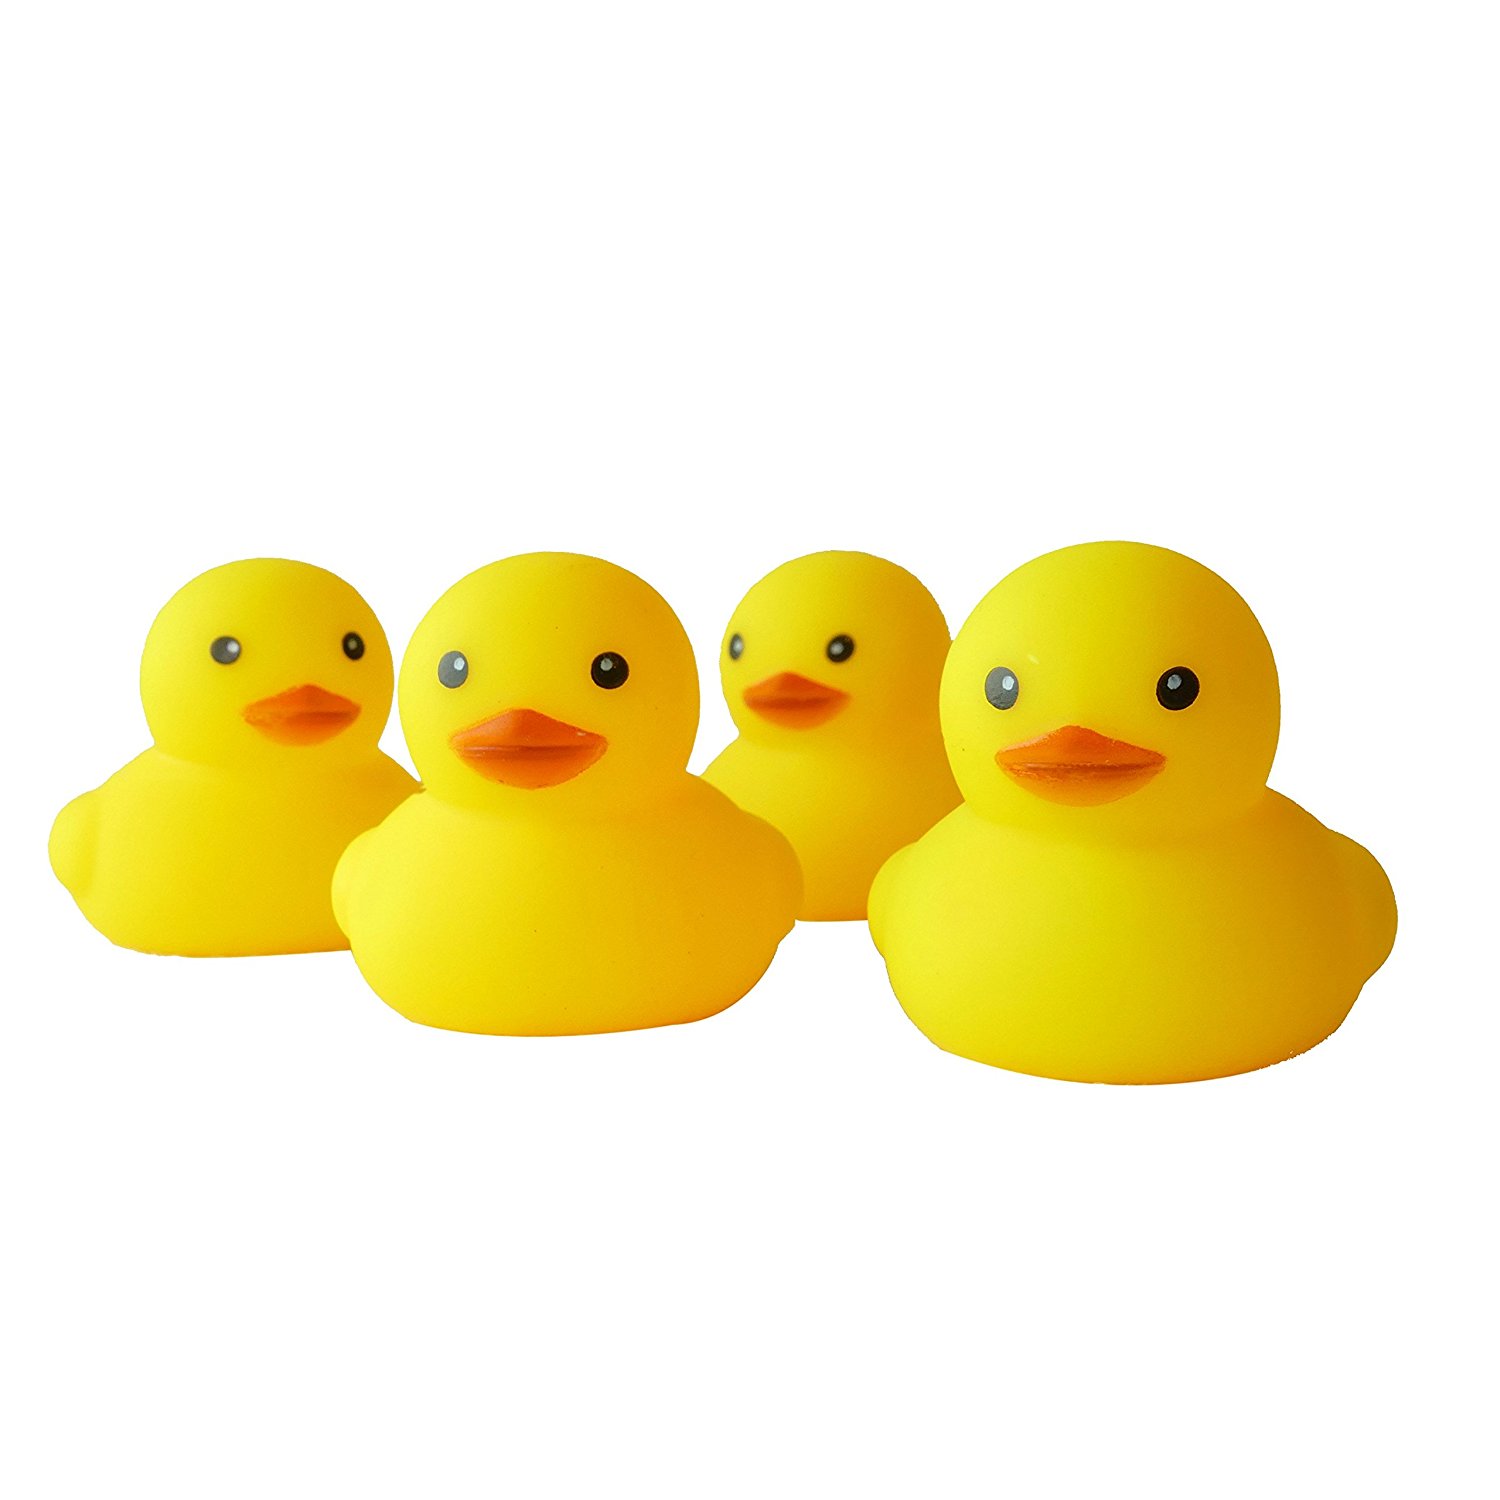 Amazon.com: Squeaky Duck Play Toy for Pets Dogs Cats, 4-Pack: Pet ...